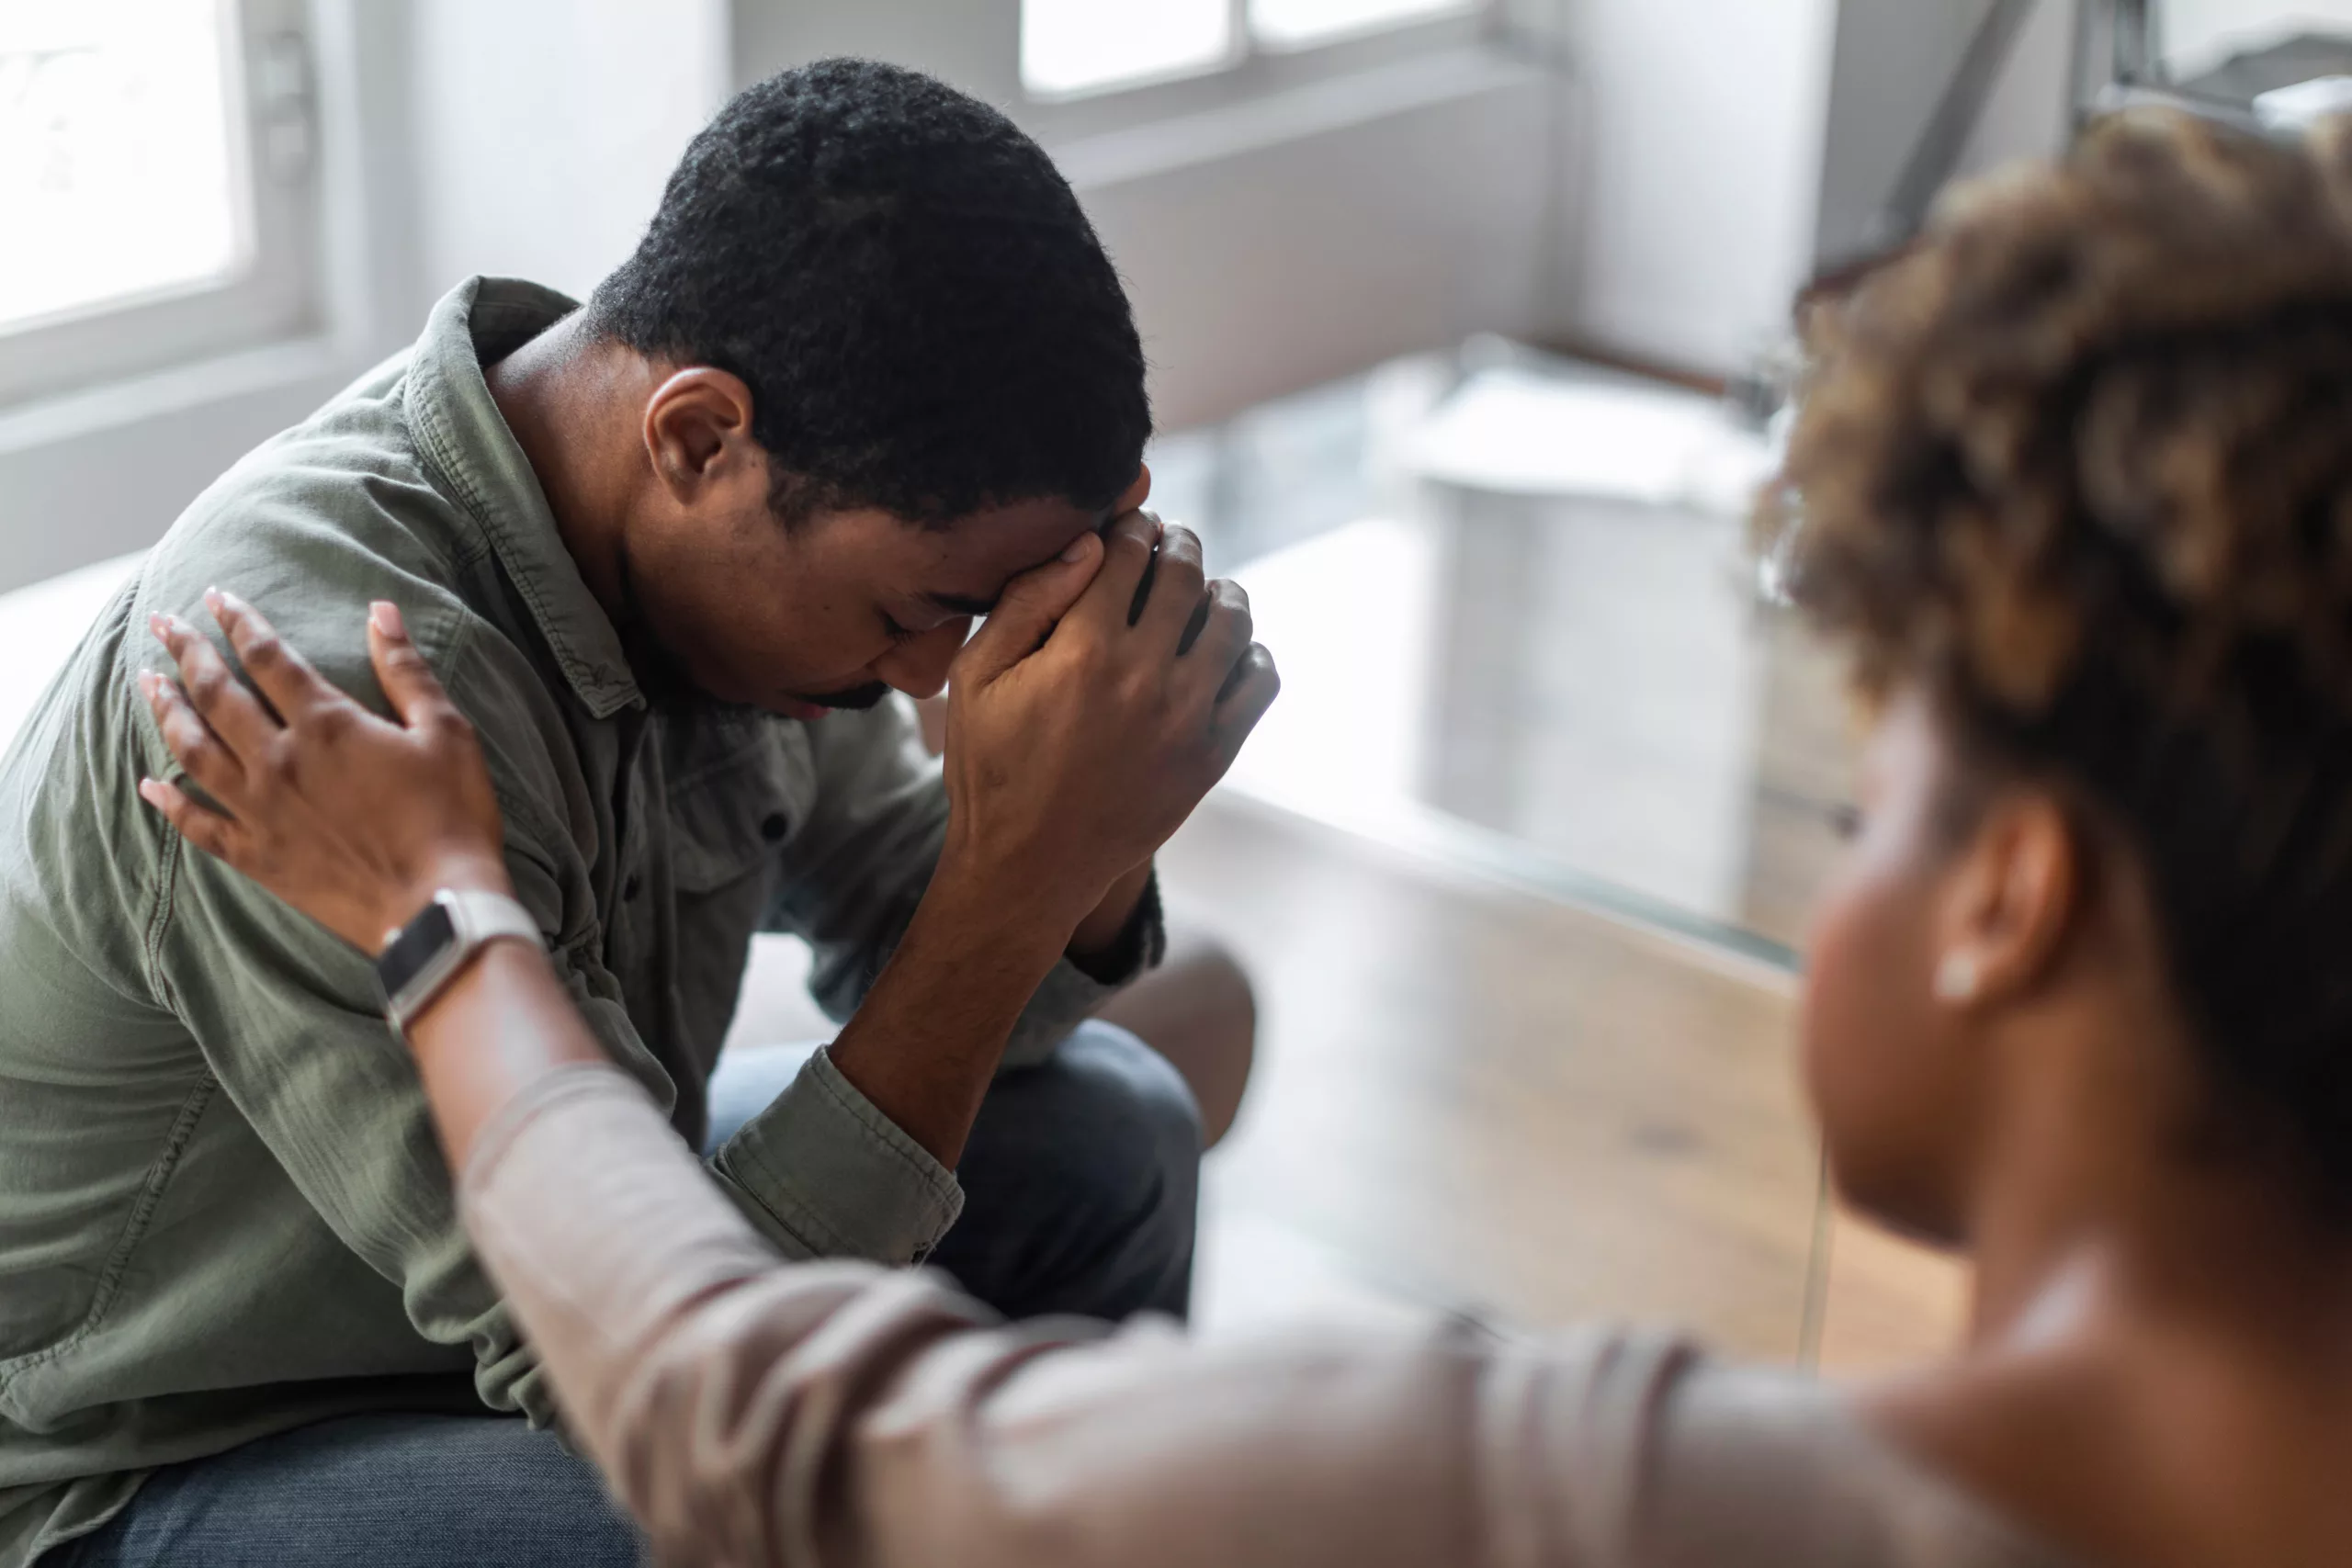 Kentuckians of color are at higher risk of experiencing traumatic stressful events